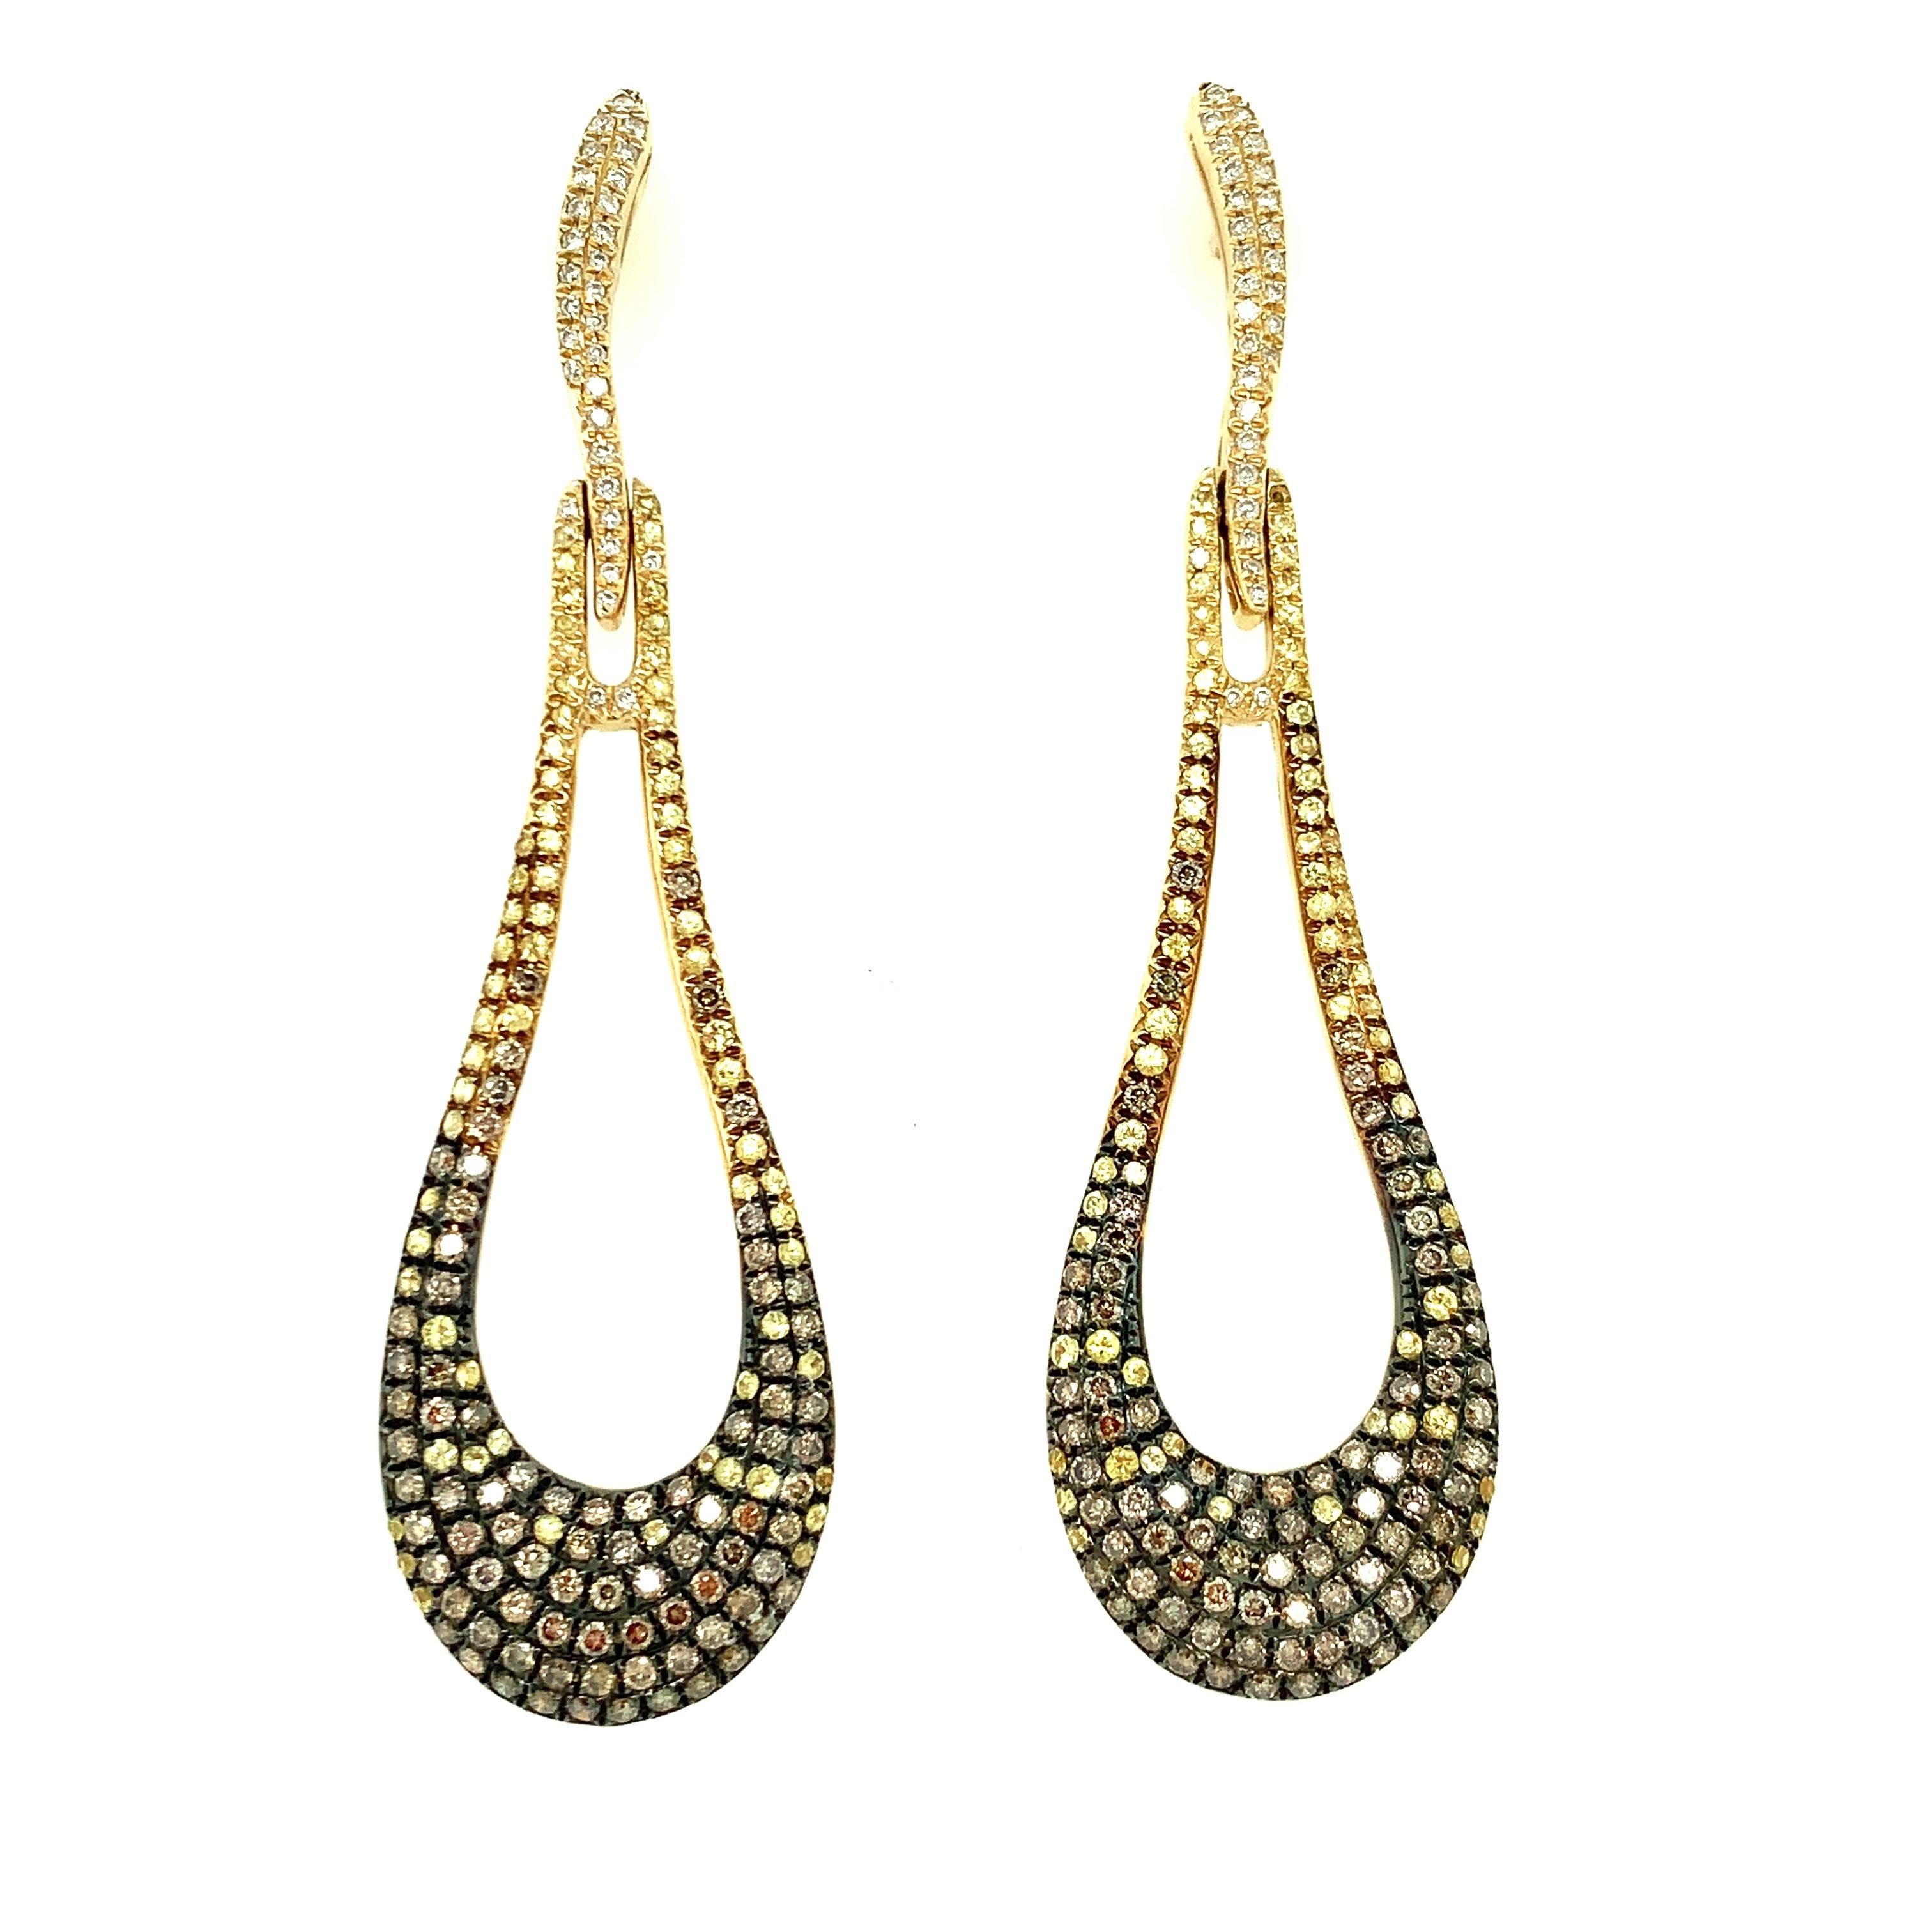 The ombre effect of these diamond, sapphire, and gold earrings make them stunning with a truly unique twist. Sparkling diamonds ranging in color from light champagne to warmer coffee tones are blended with yellow sapphires to give these earrings a